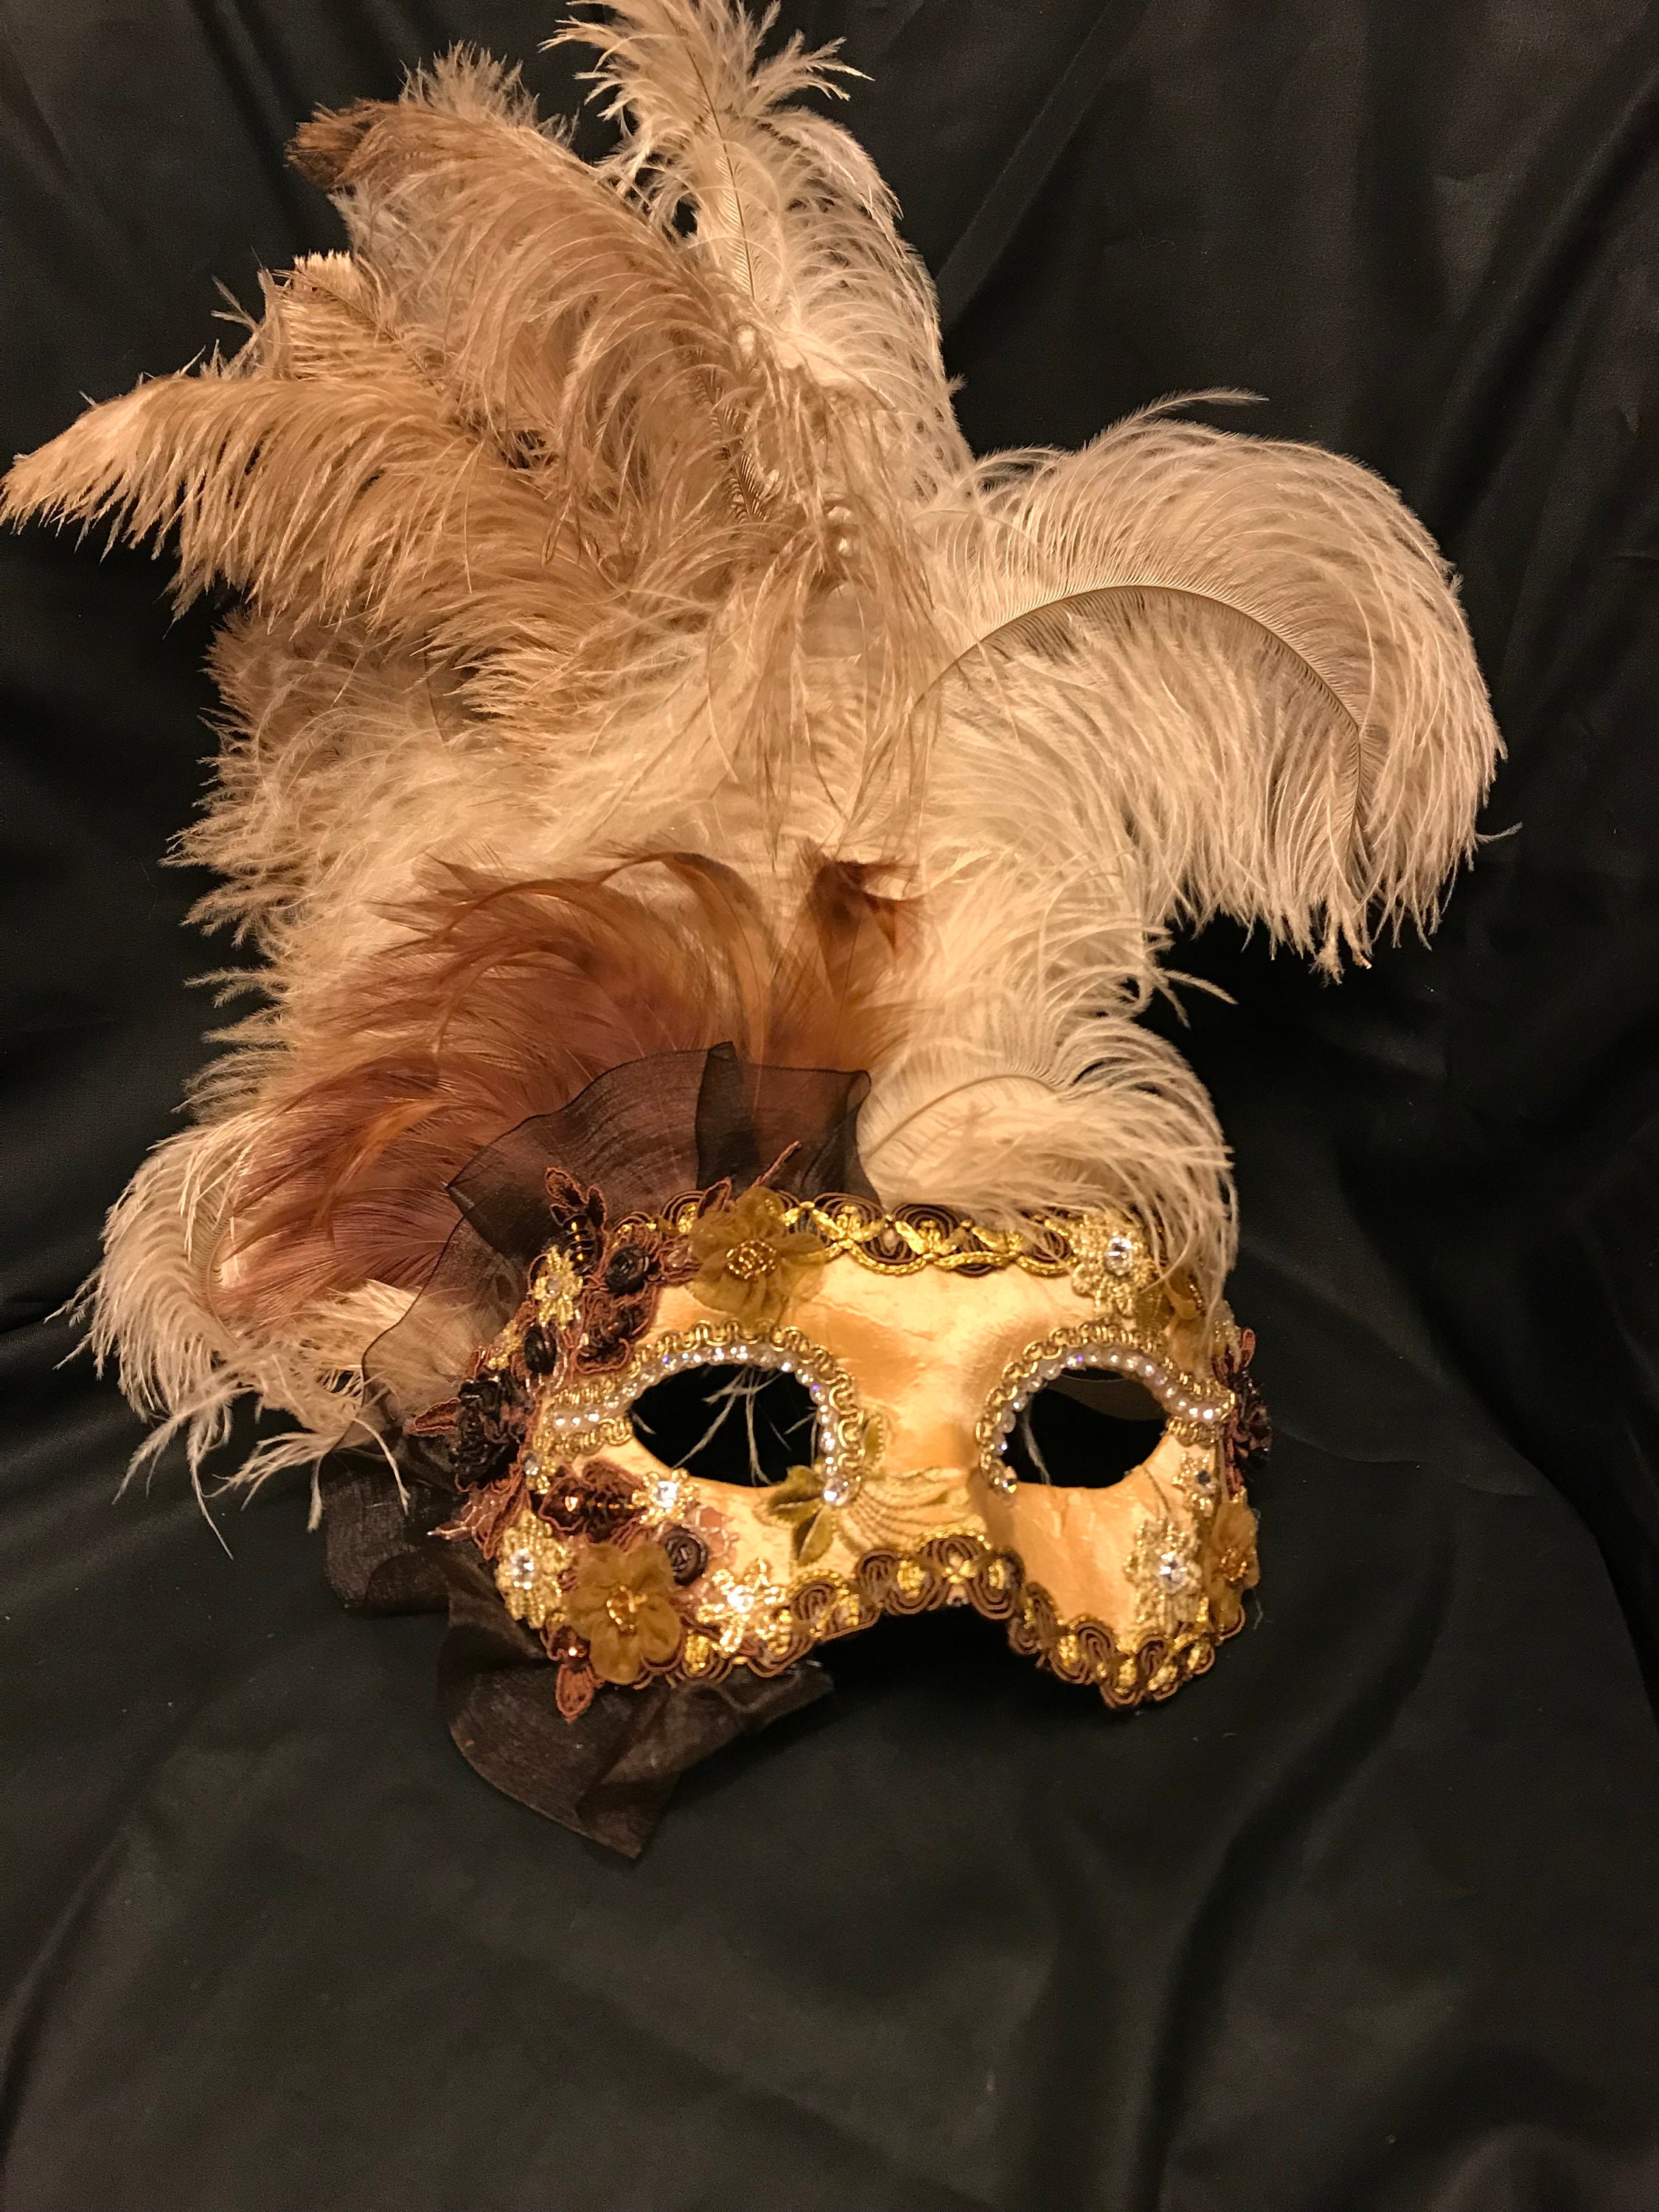 Lv Mardi Gras Sequined Mask Decorated With Feathers On A Bed Of